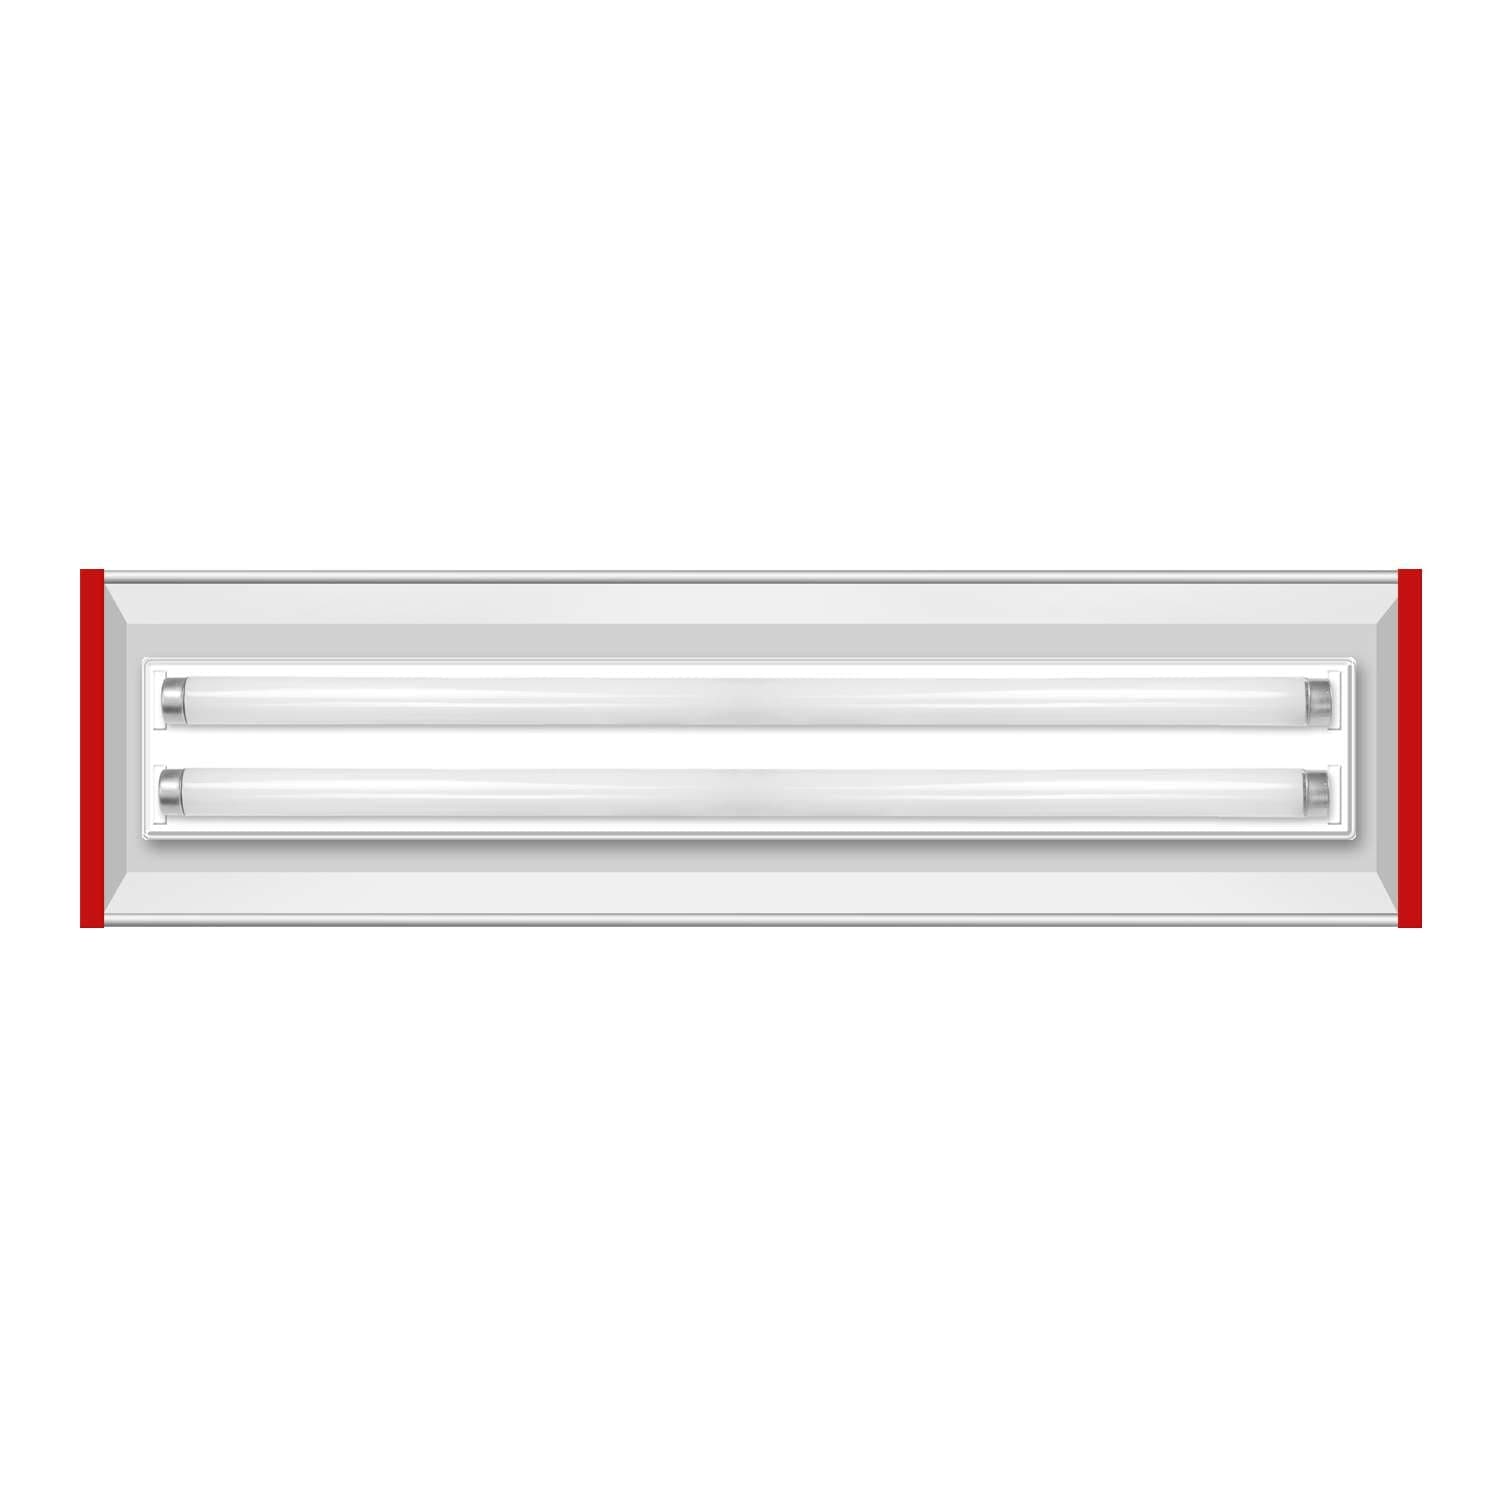 Washington State Cougars: Standard Pool Table Light - The Fan-Brand